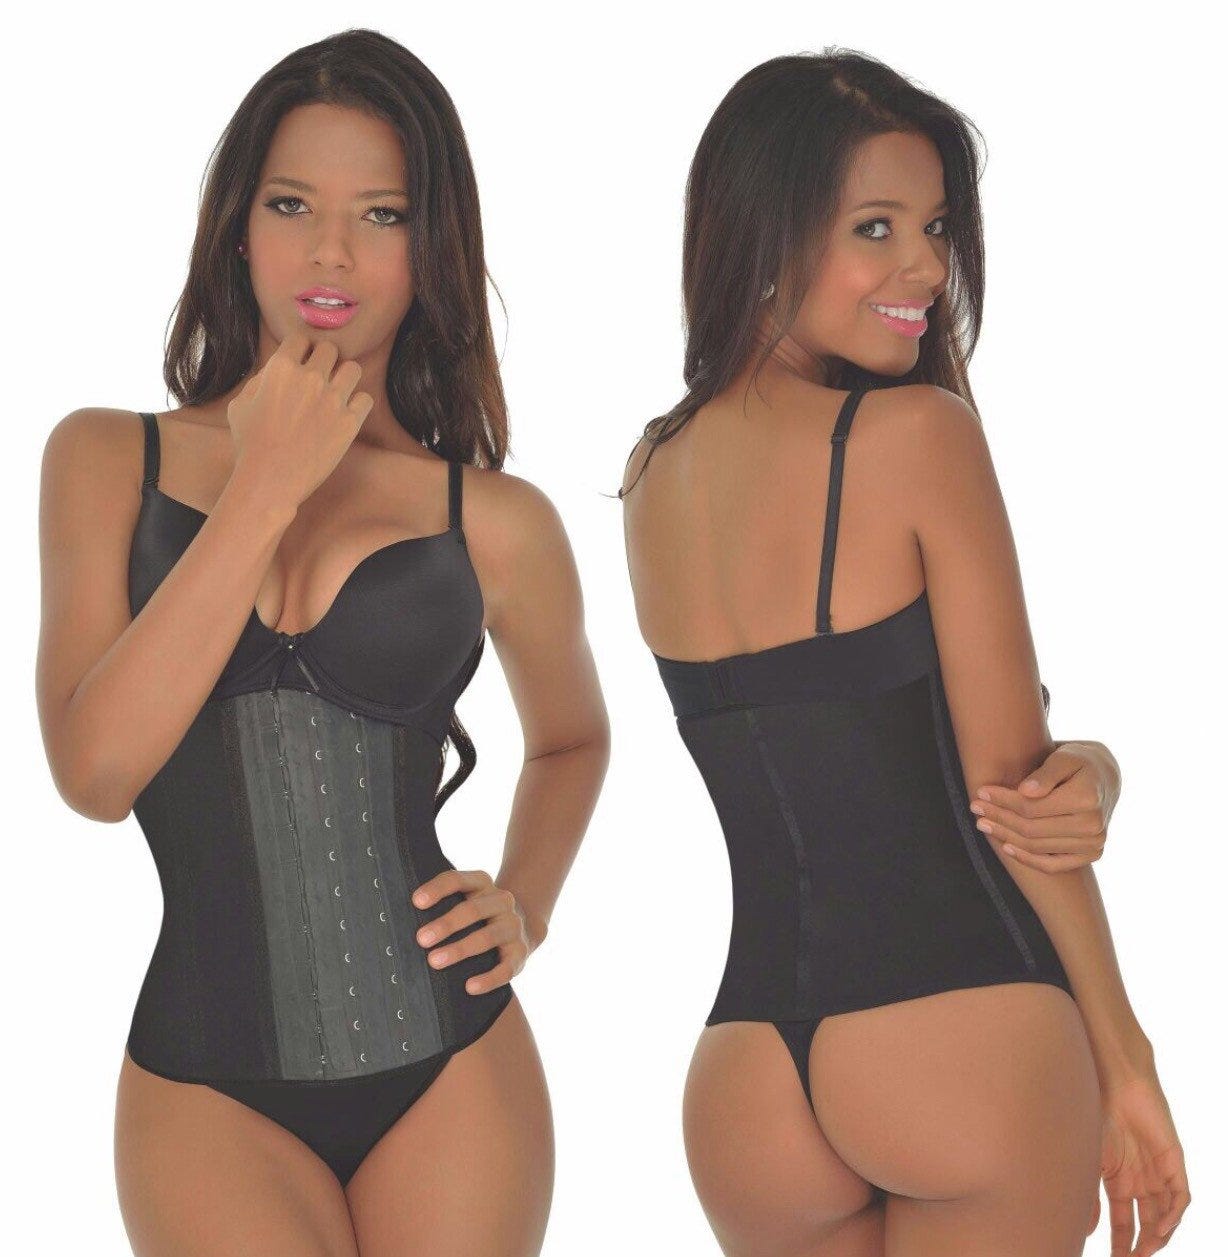 Workband Waist Cincher (Great for Workout), by Gajanand Choudhary